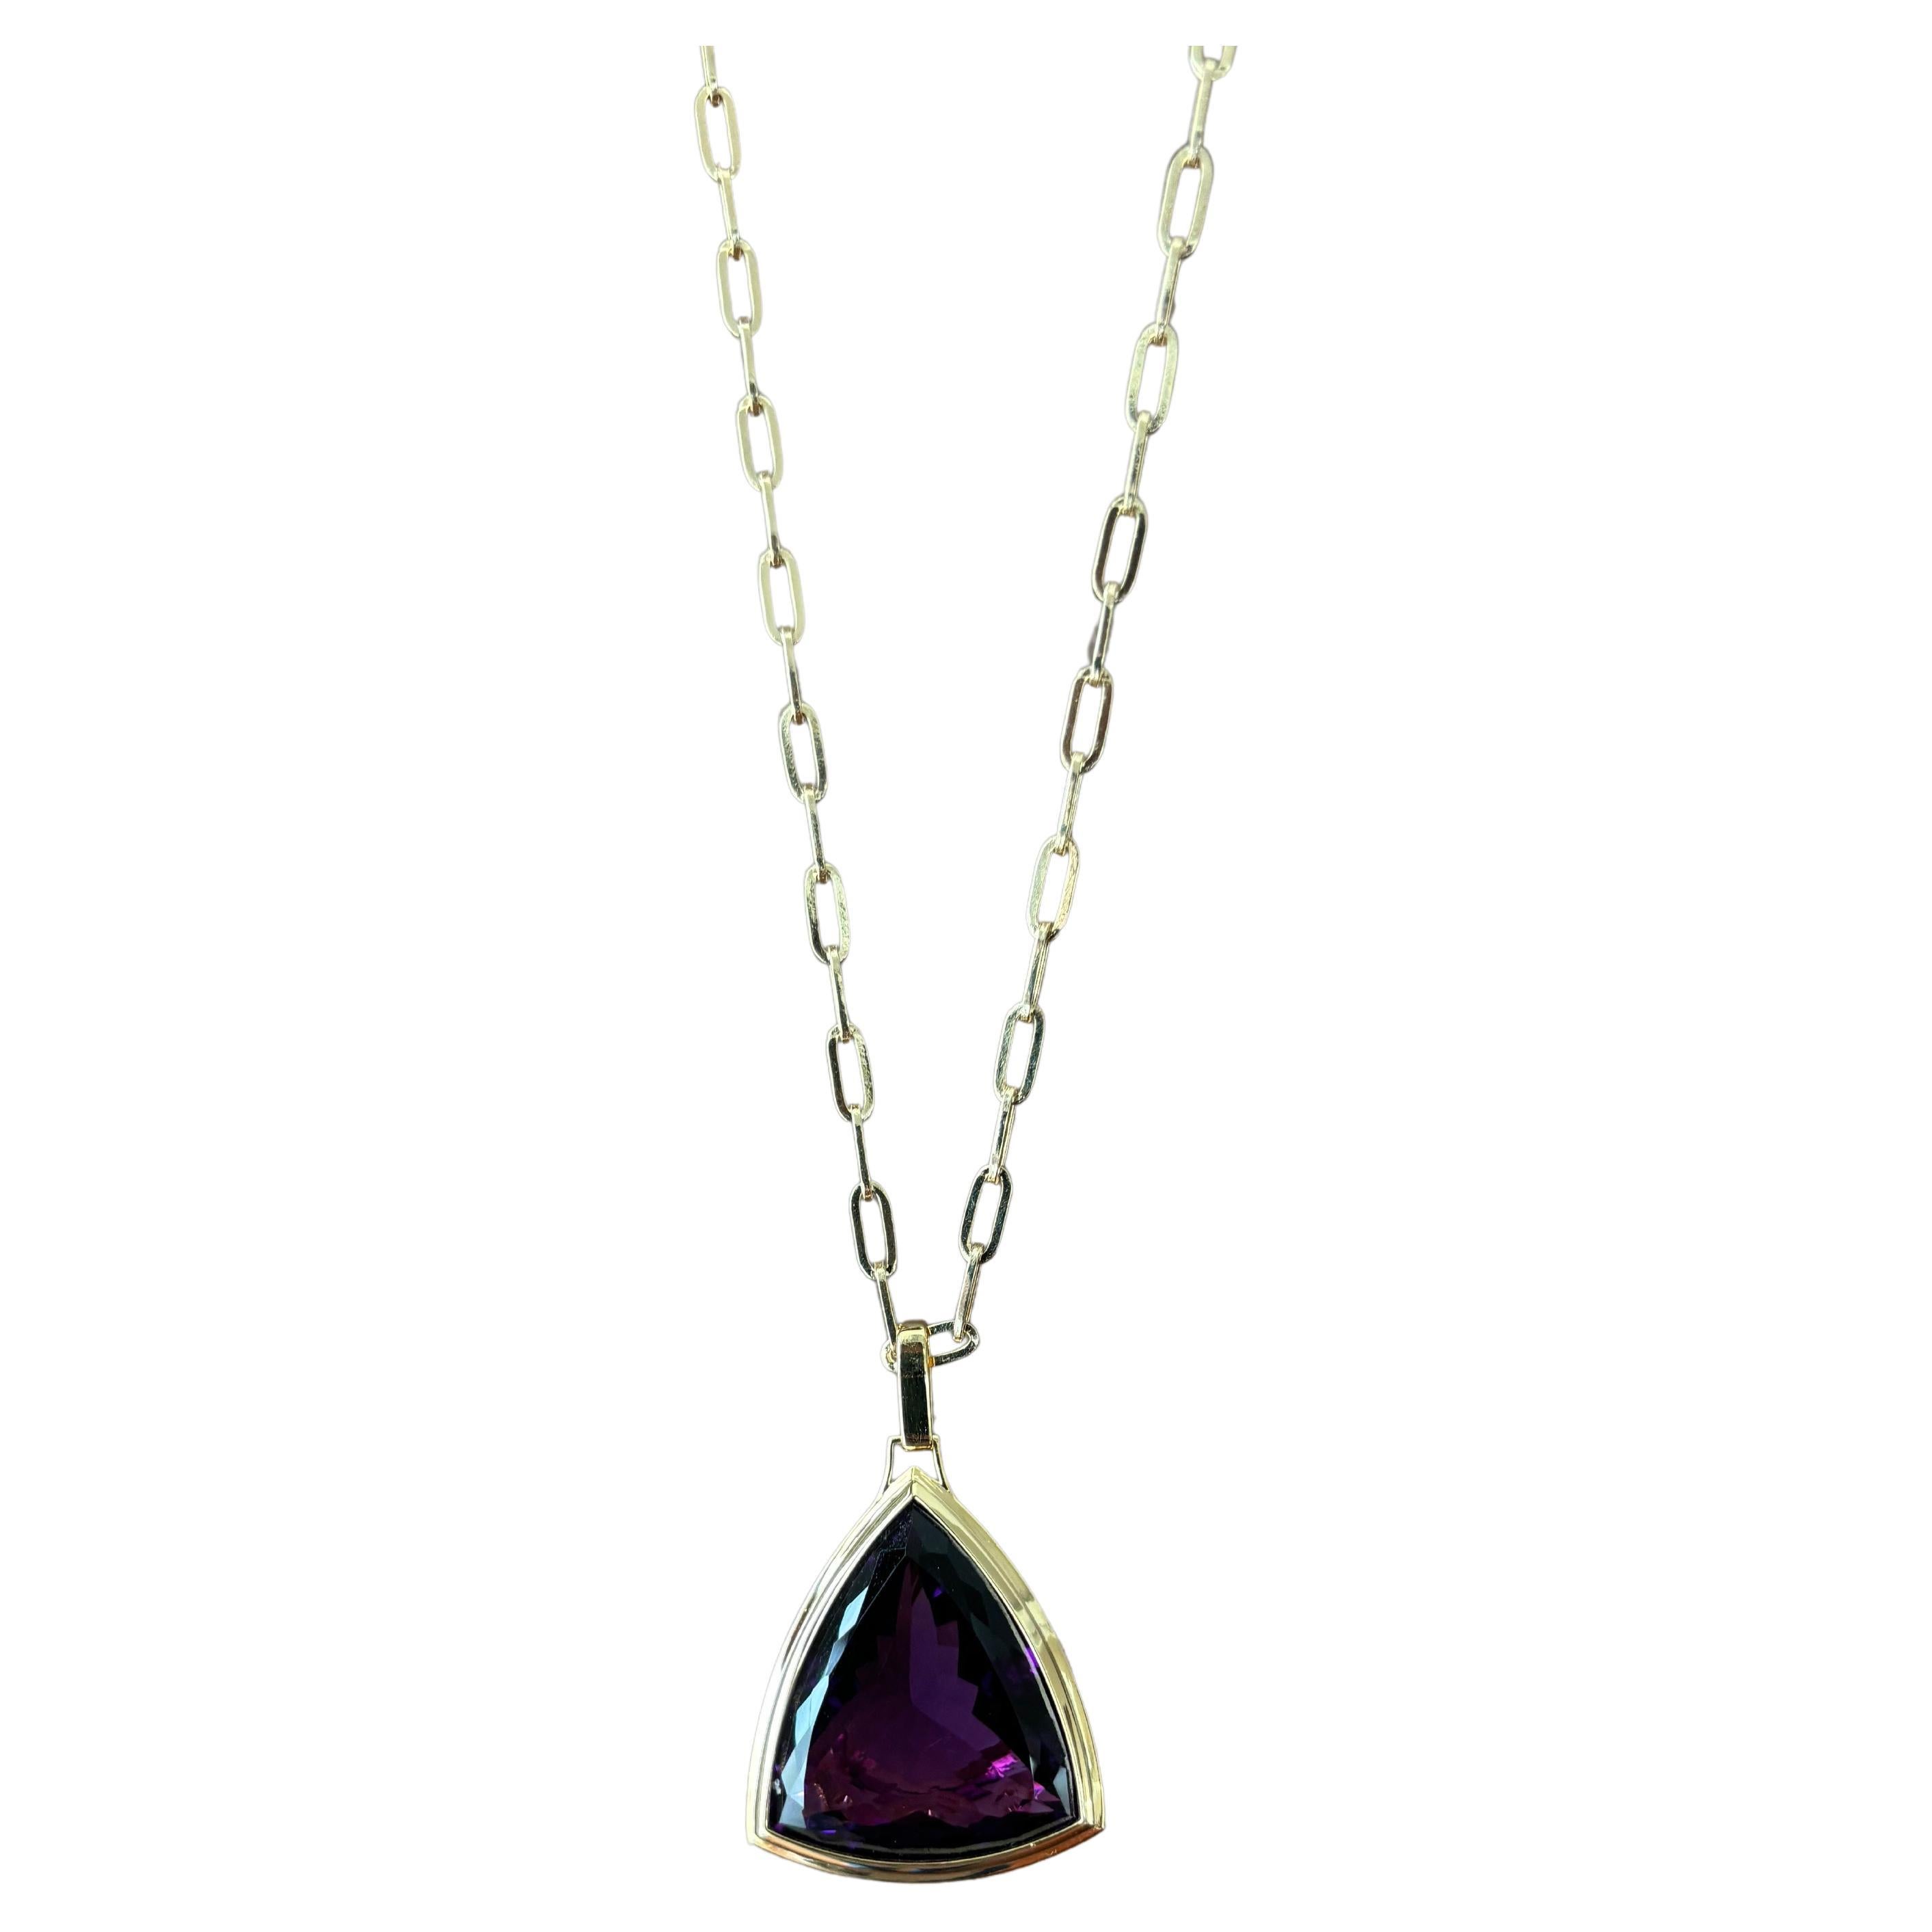 44.03 Carat Pear Shape Amethyst Pendant Necklace with Link Chain  For Sale